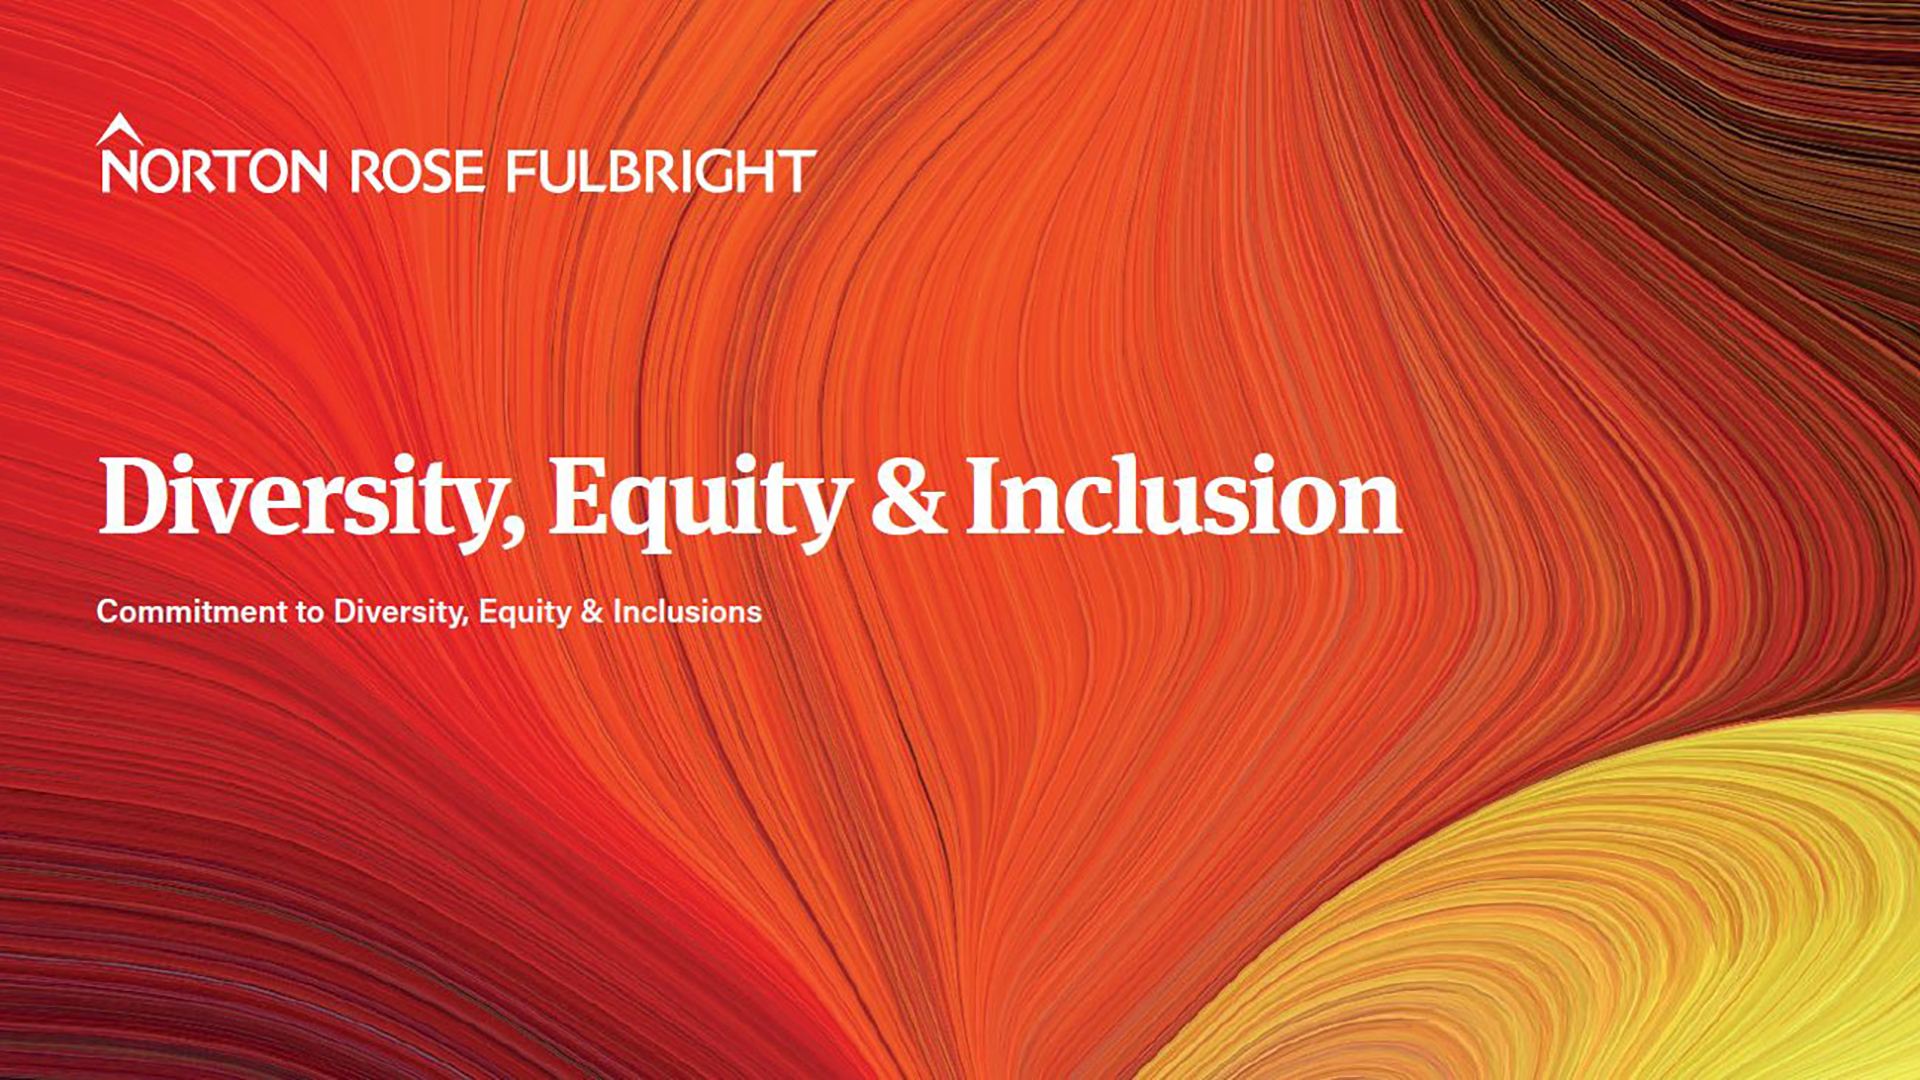 Norton Rose Fulbright | Diversity, Equity & Inclusion